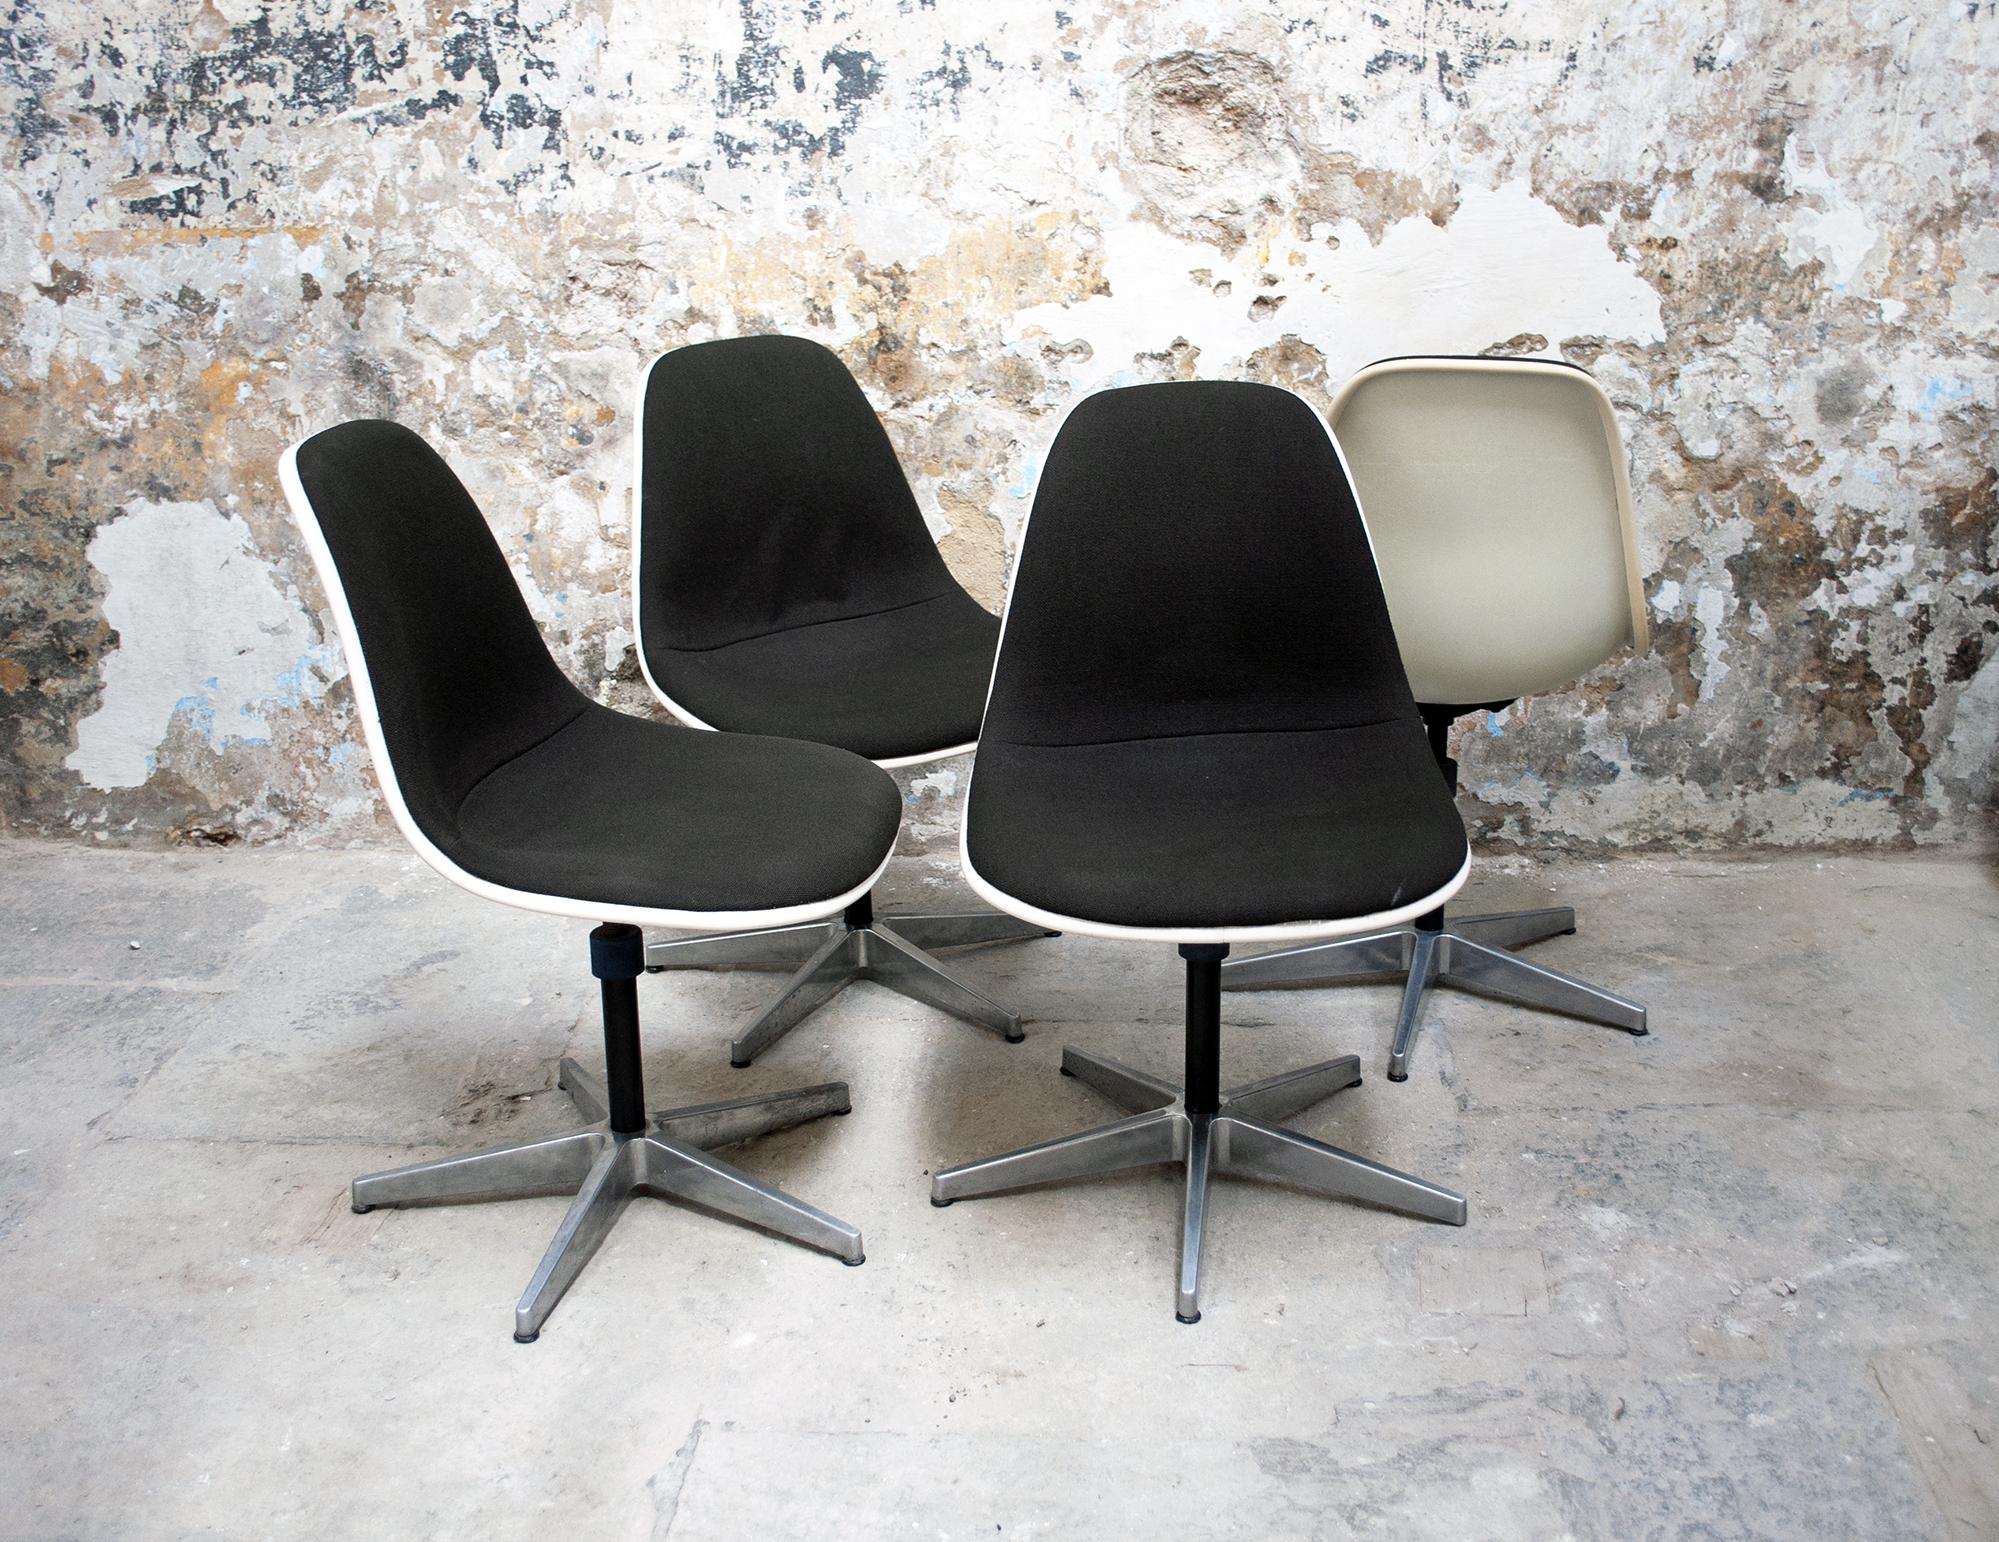 Eight chairs with iron base, aluminum feet and fiberglass and fabric seat.
Designer Charles & Ray Eames
Producer Herman Miller
1960s.